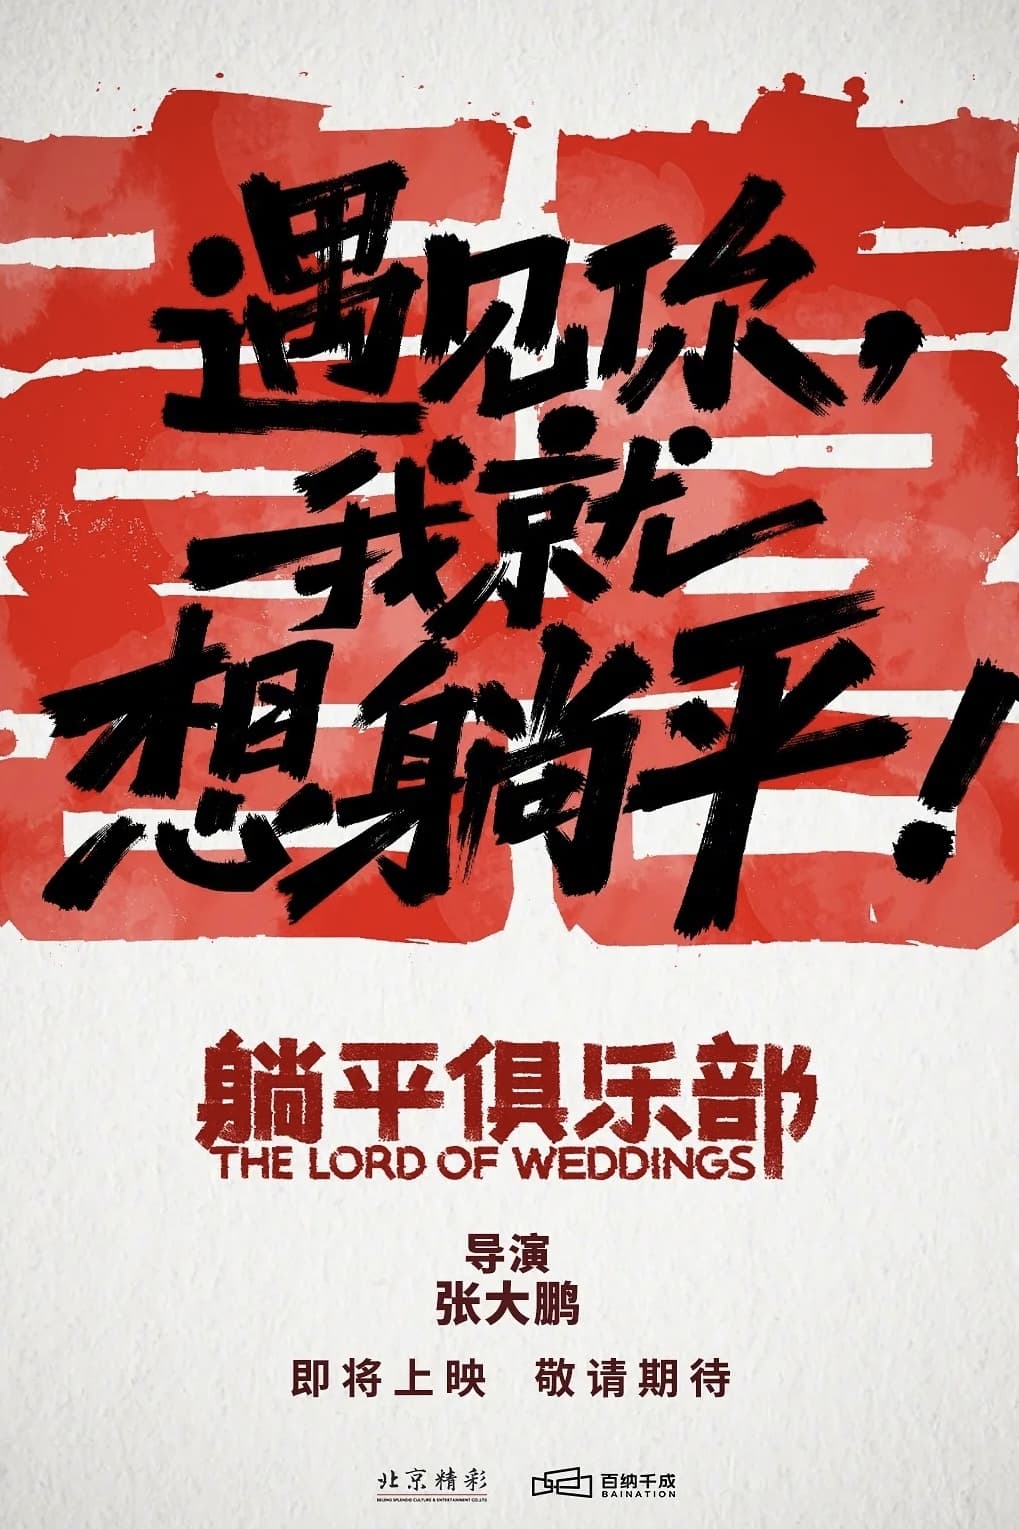 The Lord of Weddings